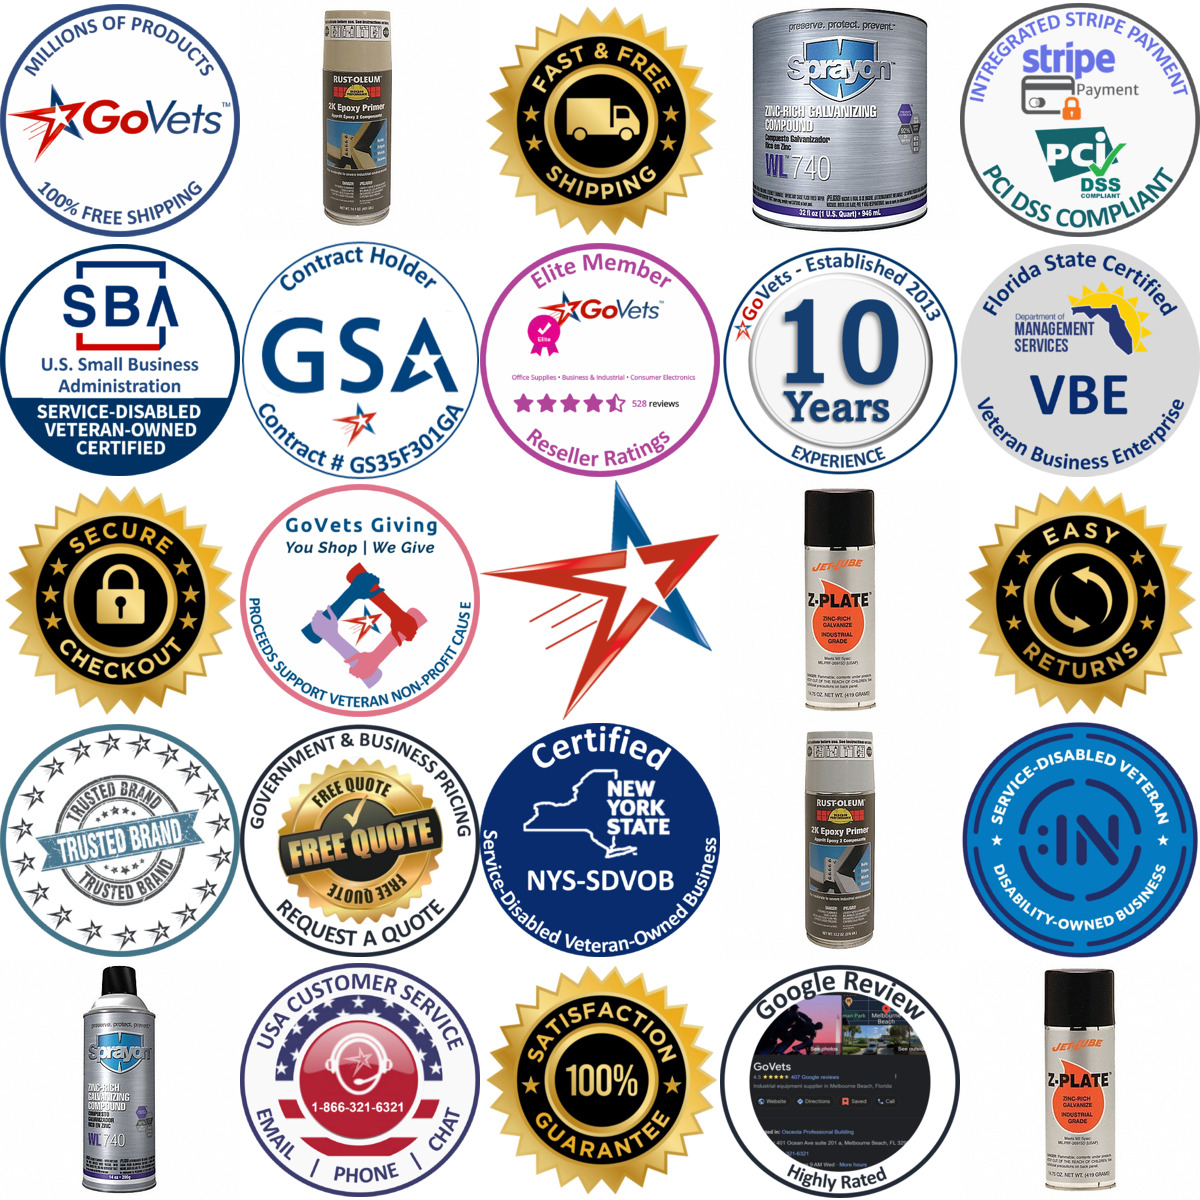 A selection of Epoxy Based Spray Primers products on GoVets